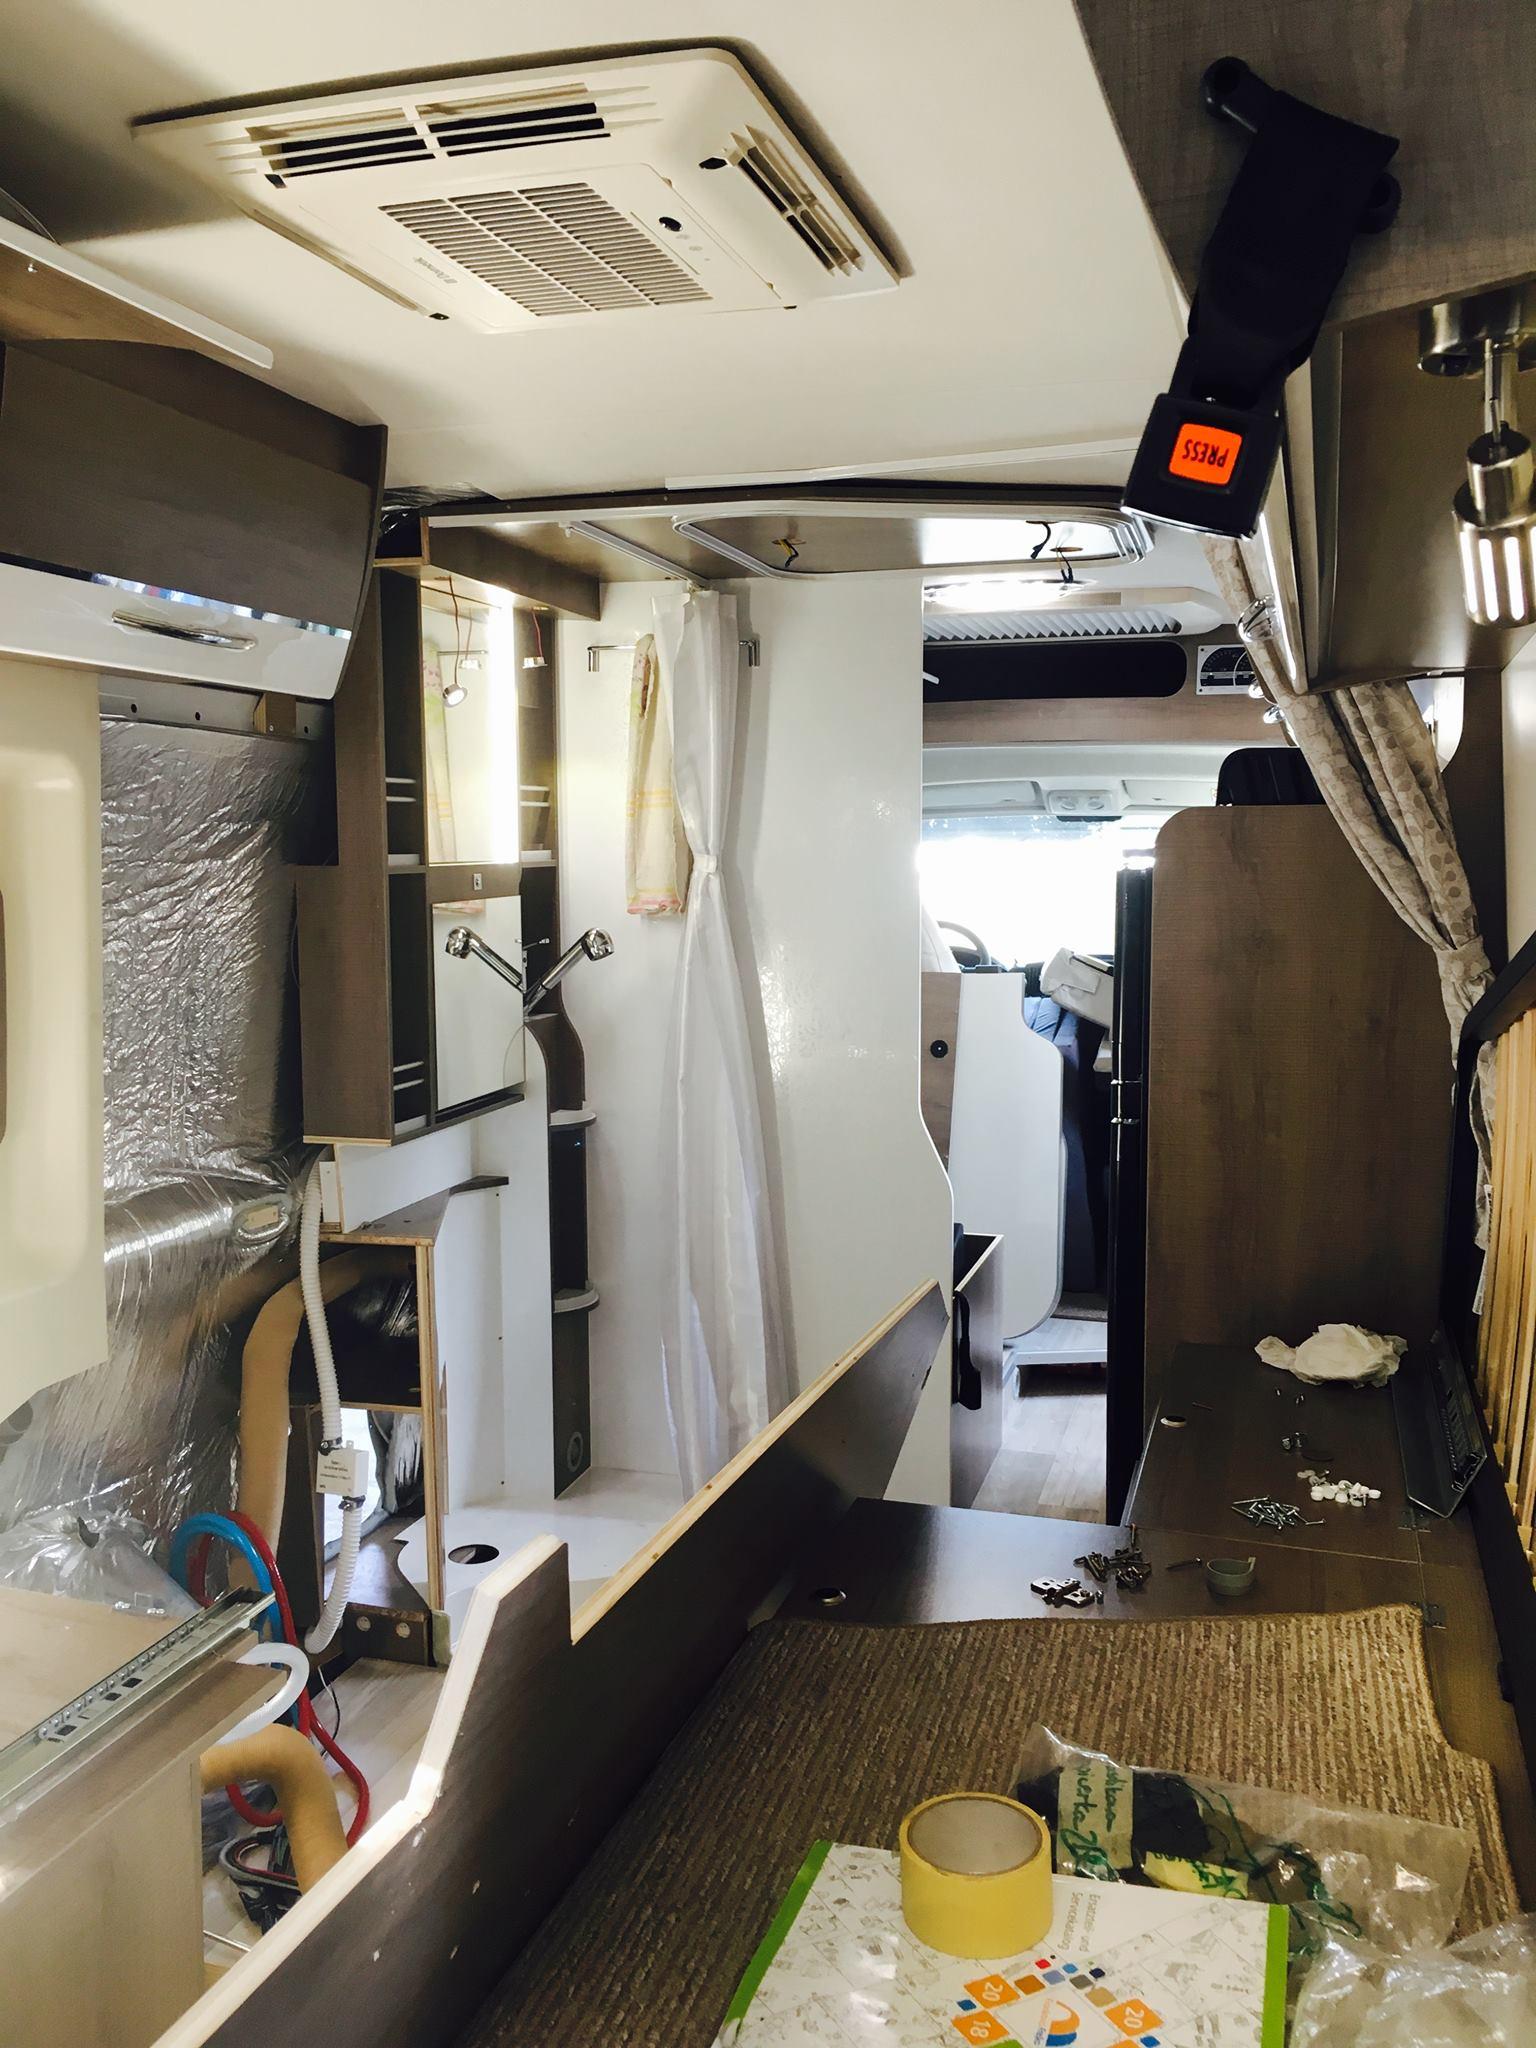 Motorhome renovation from scratch. What is worth thinking about? – image 3